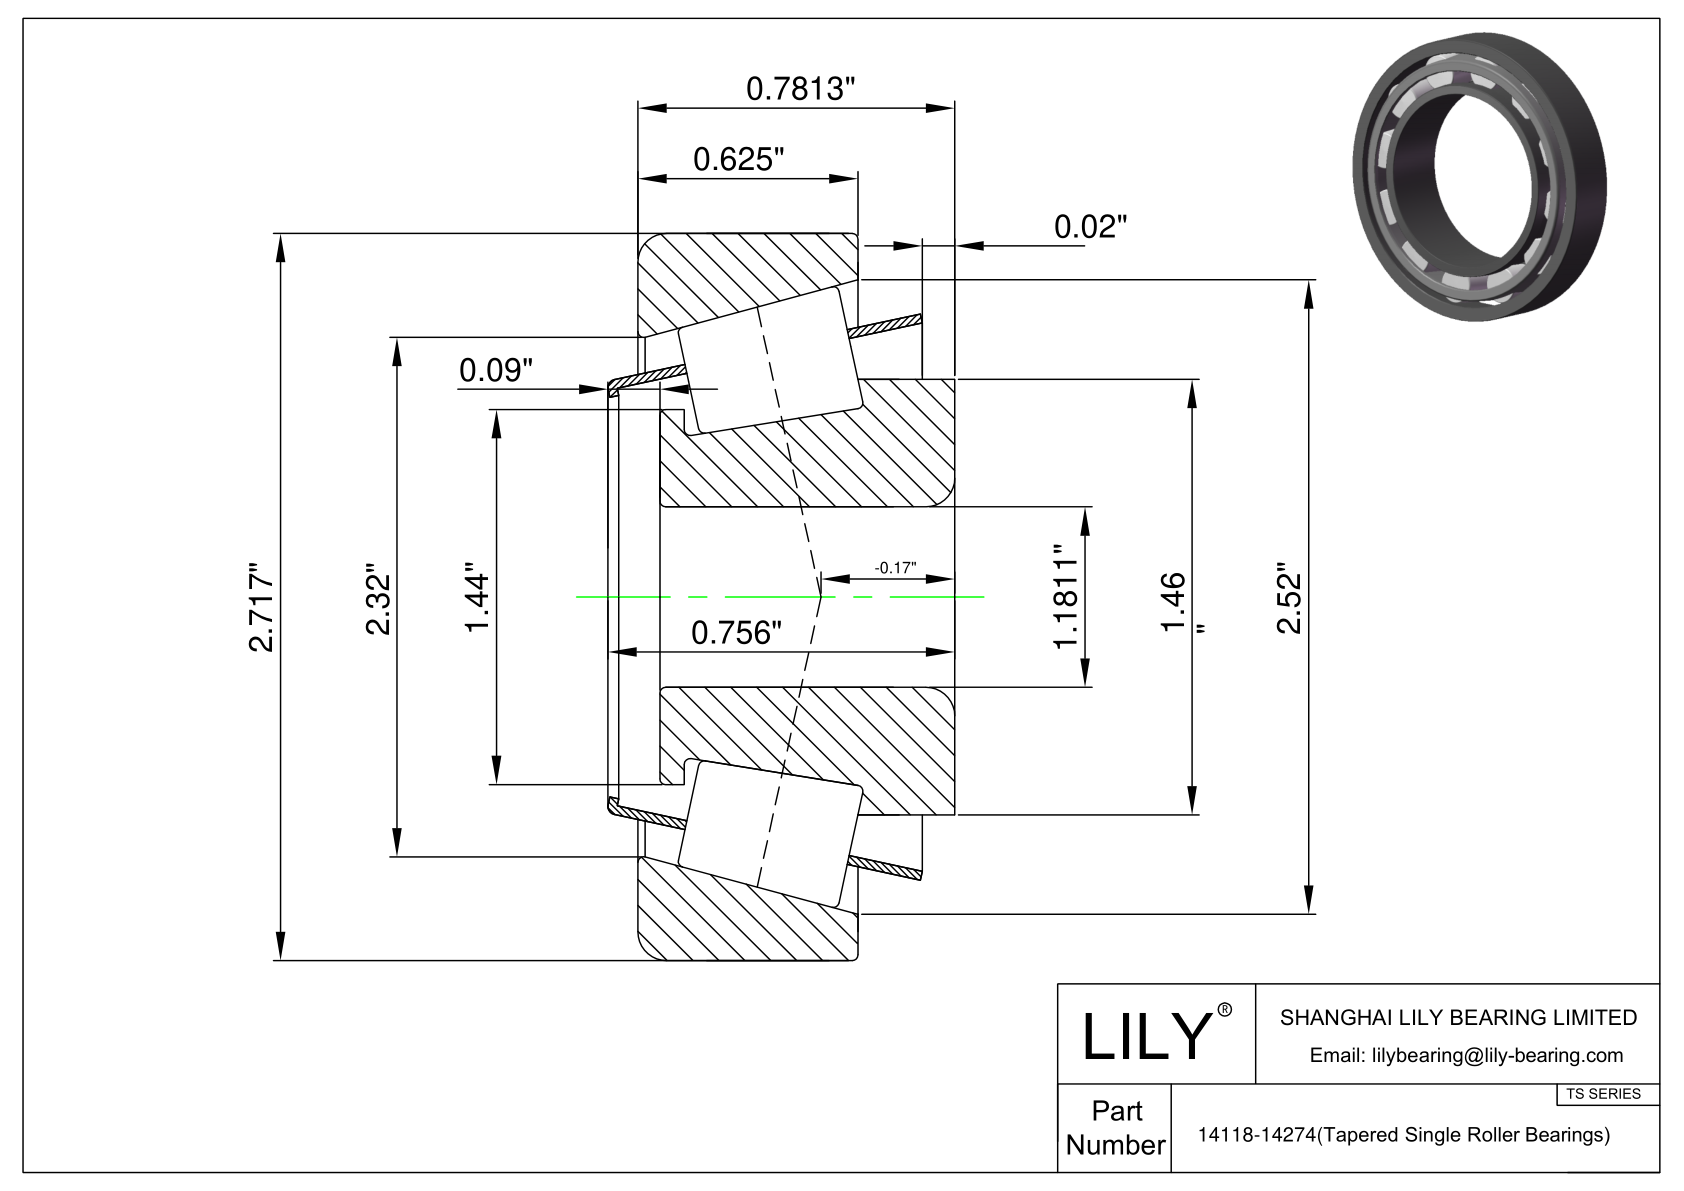 14118-14274 TS (Tapered Single Roller Bearings) (Imperial) cad drawing